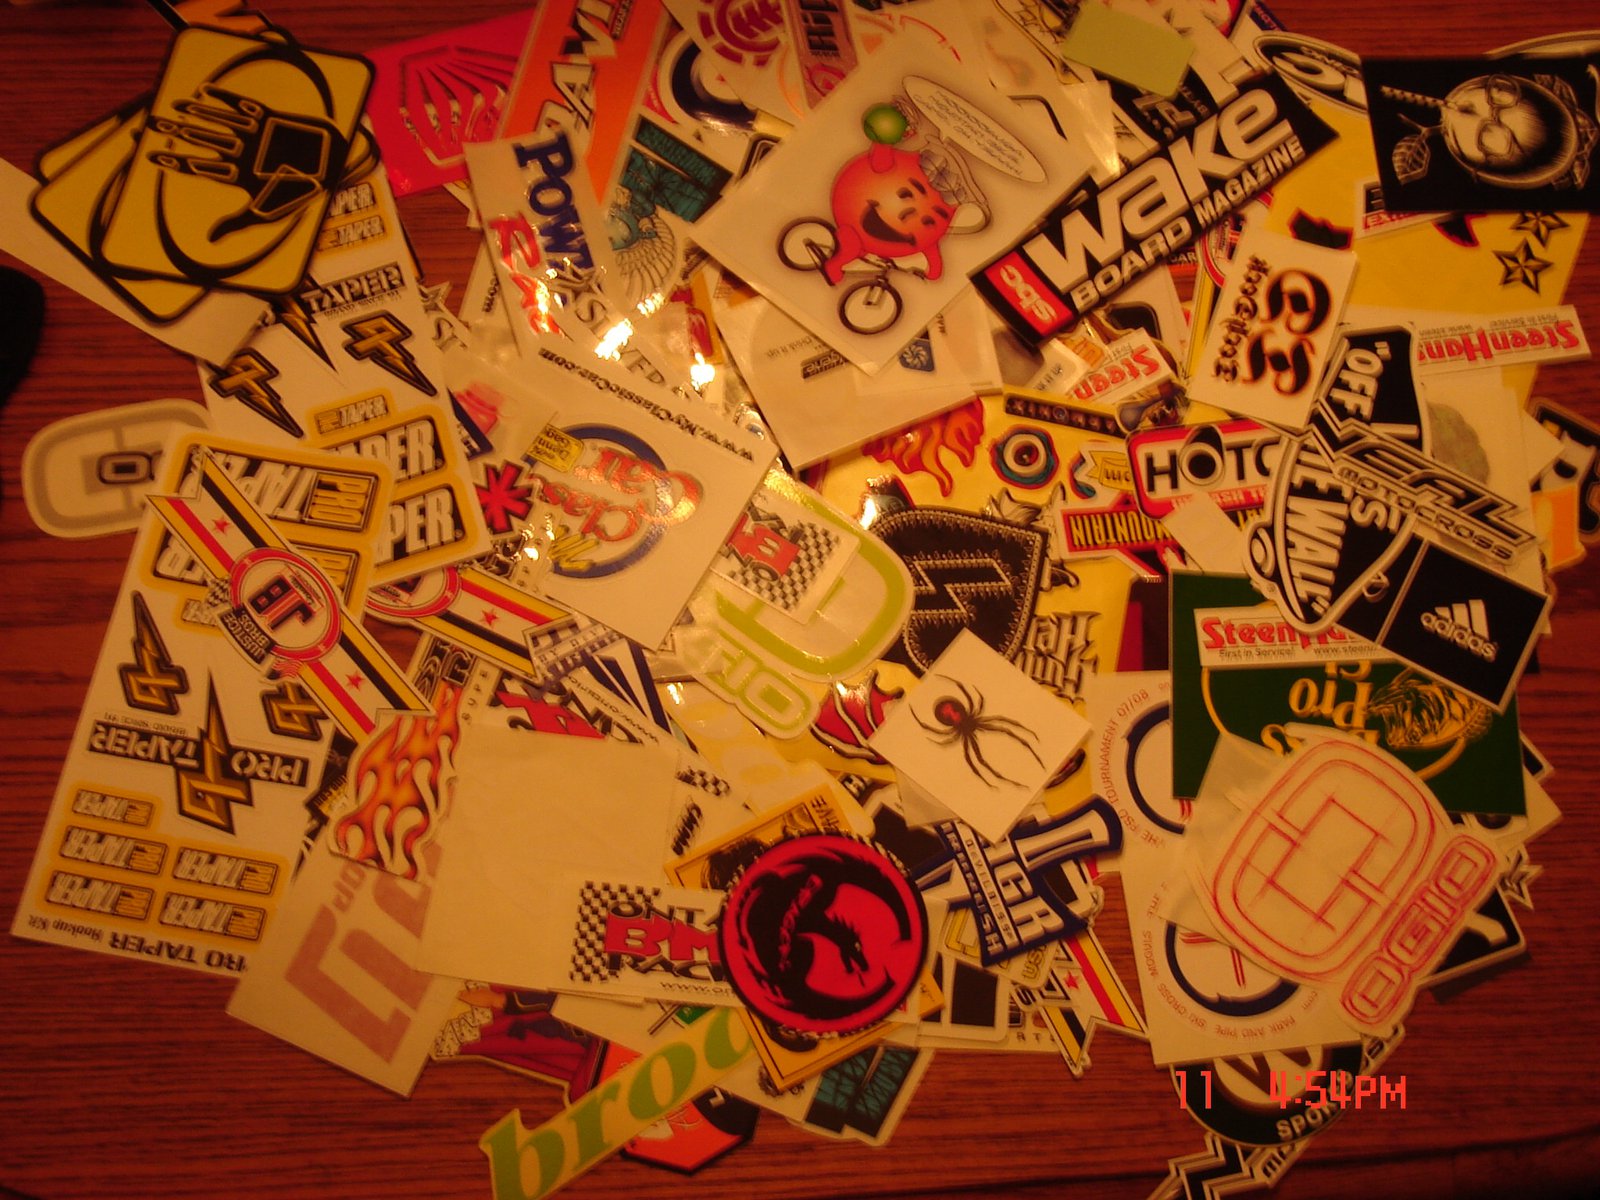 Some of my stickers